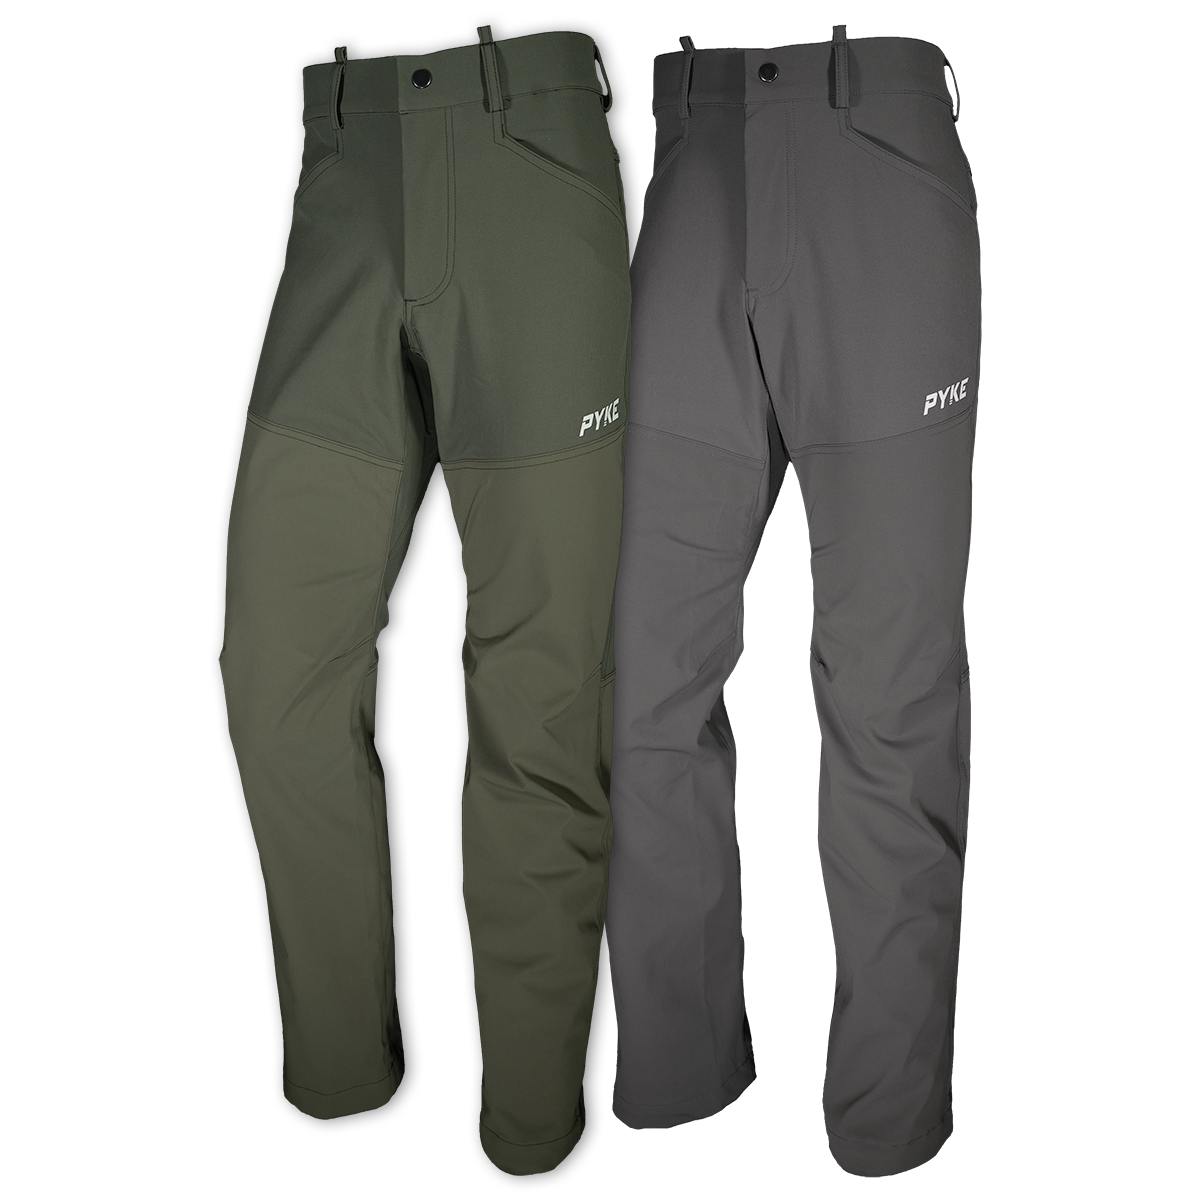 Orvis: Such great pants for bird hunting, my wife purchased some